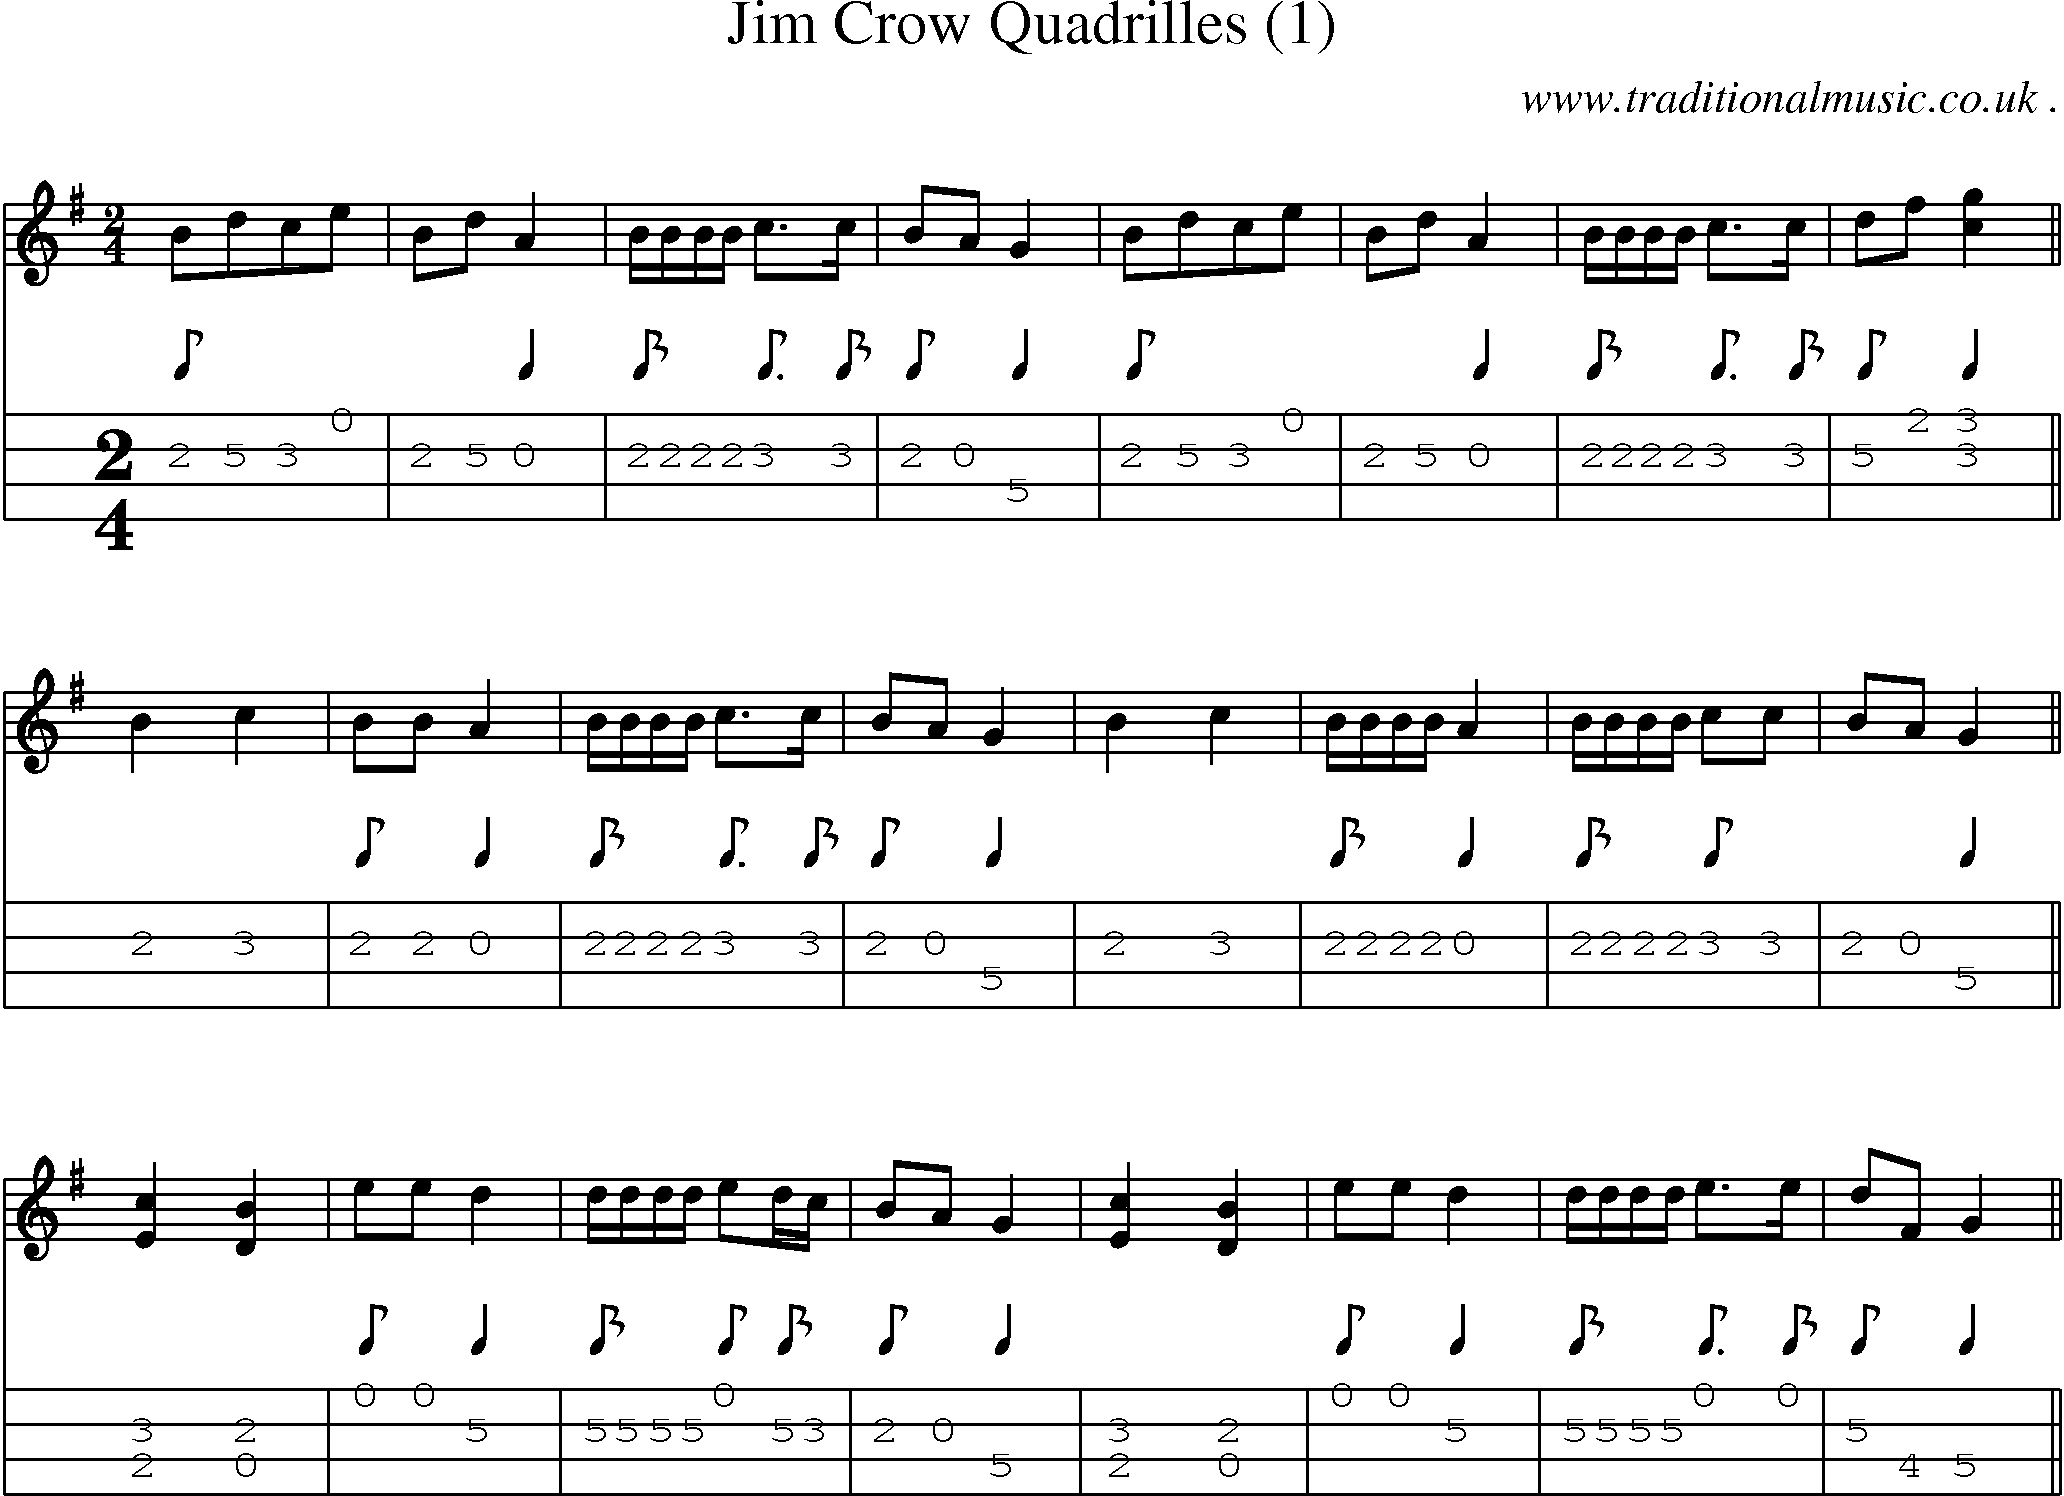 Sheet-Music and Mandolin Tabs for Jim Crow Quadrilles (1)